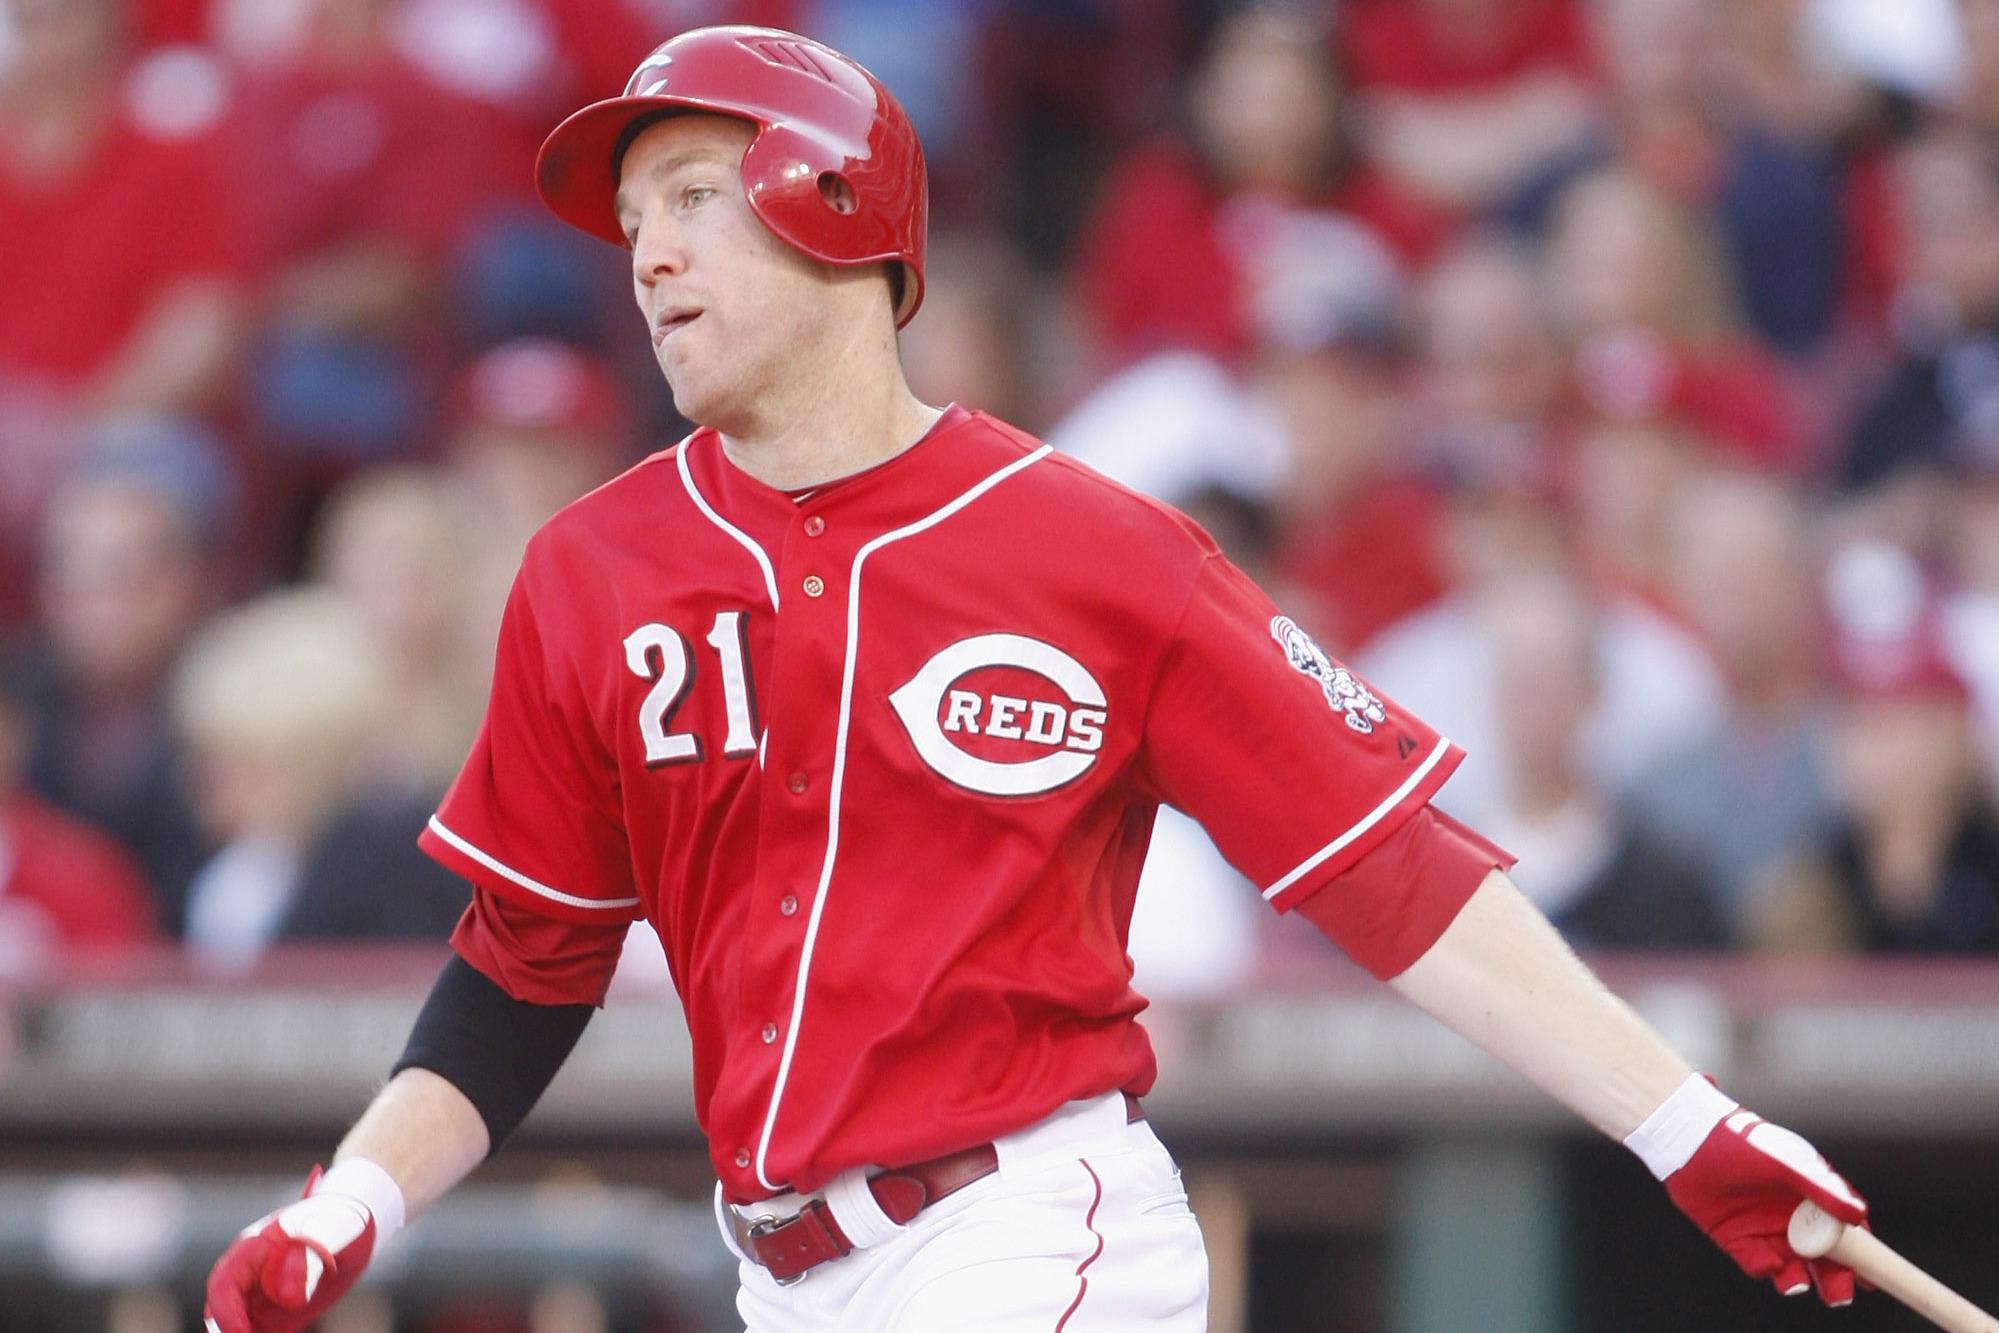 The 9 greatest players in Cincinnati Reds history